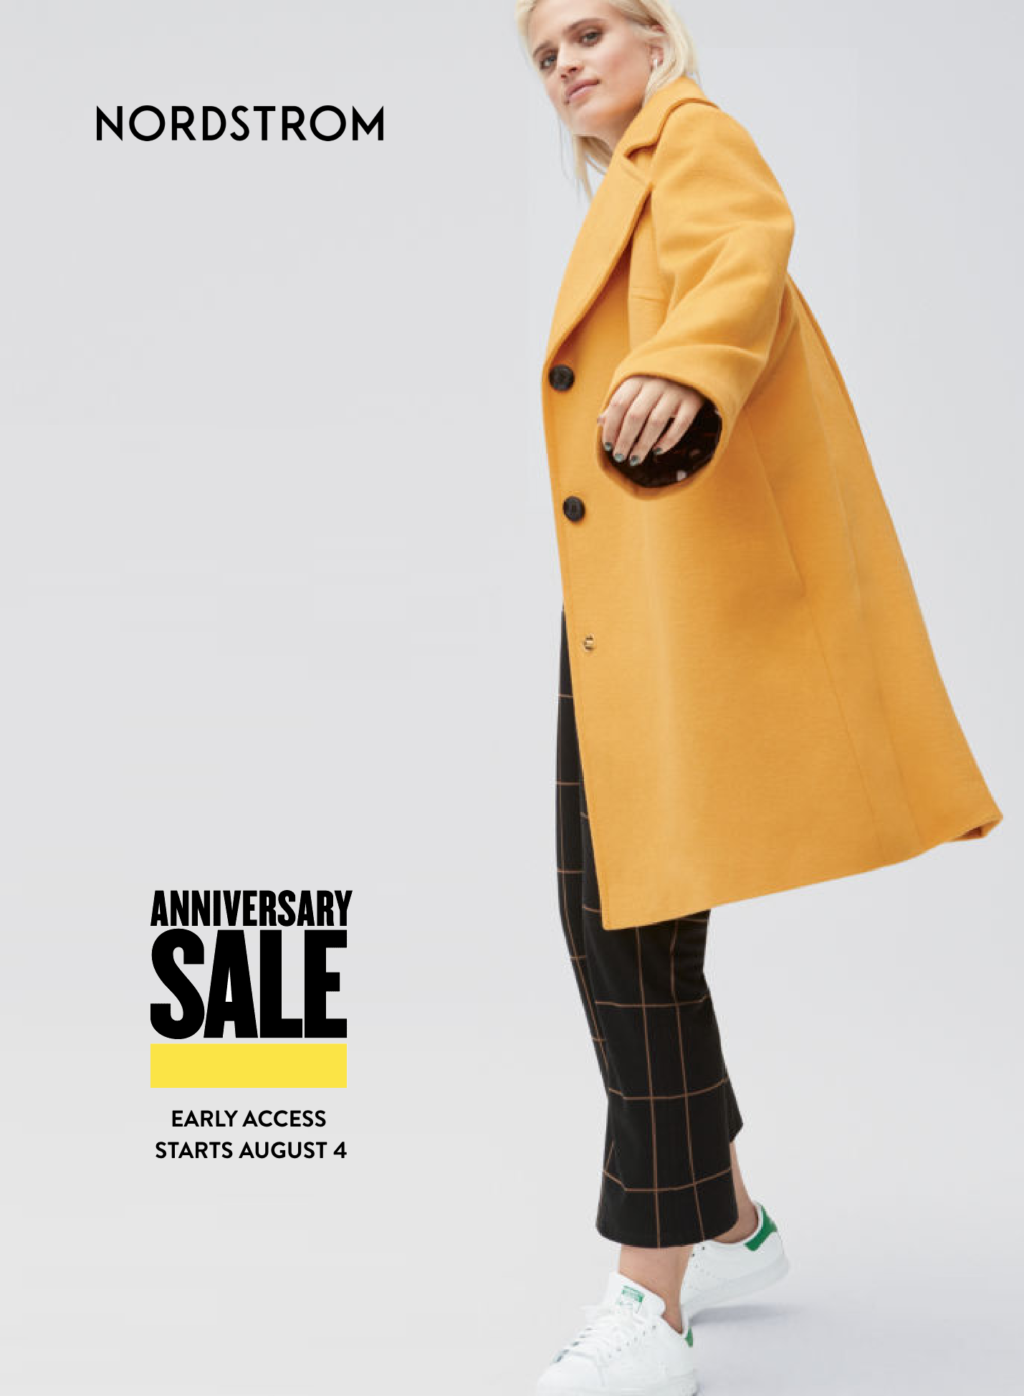 Nordstrom Anniversary Sale 2020 Catalog Top Picks by Category